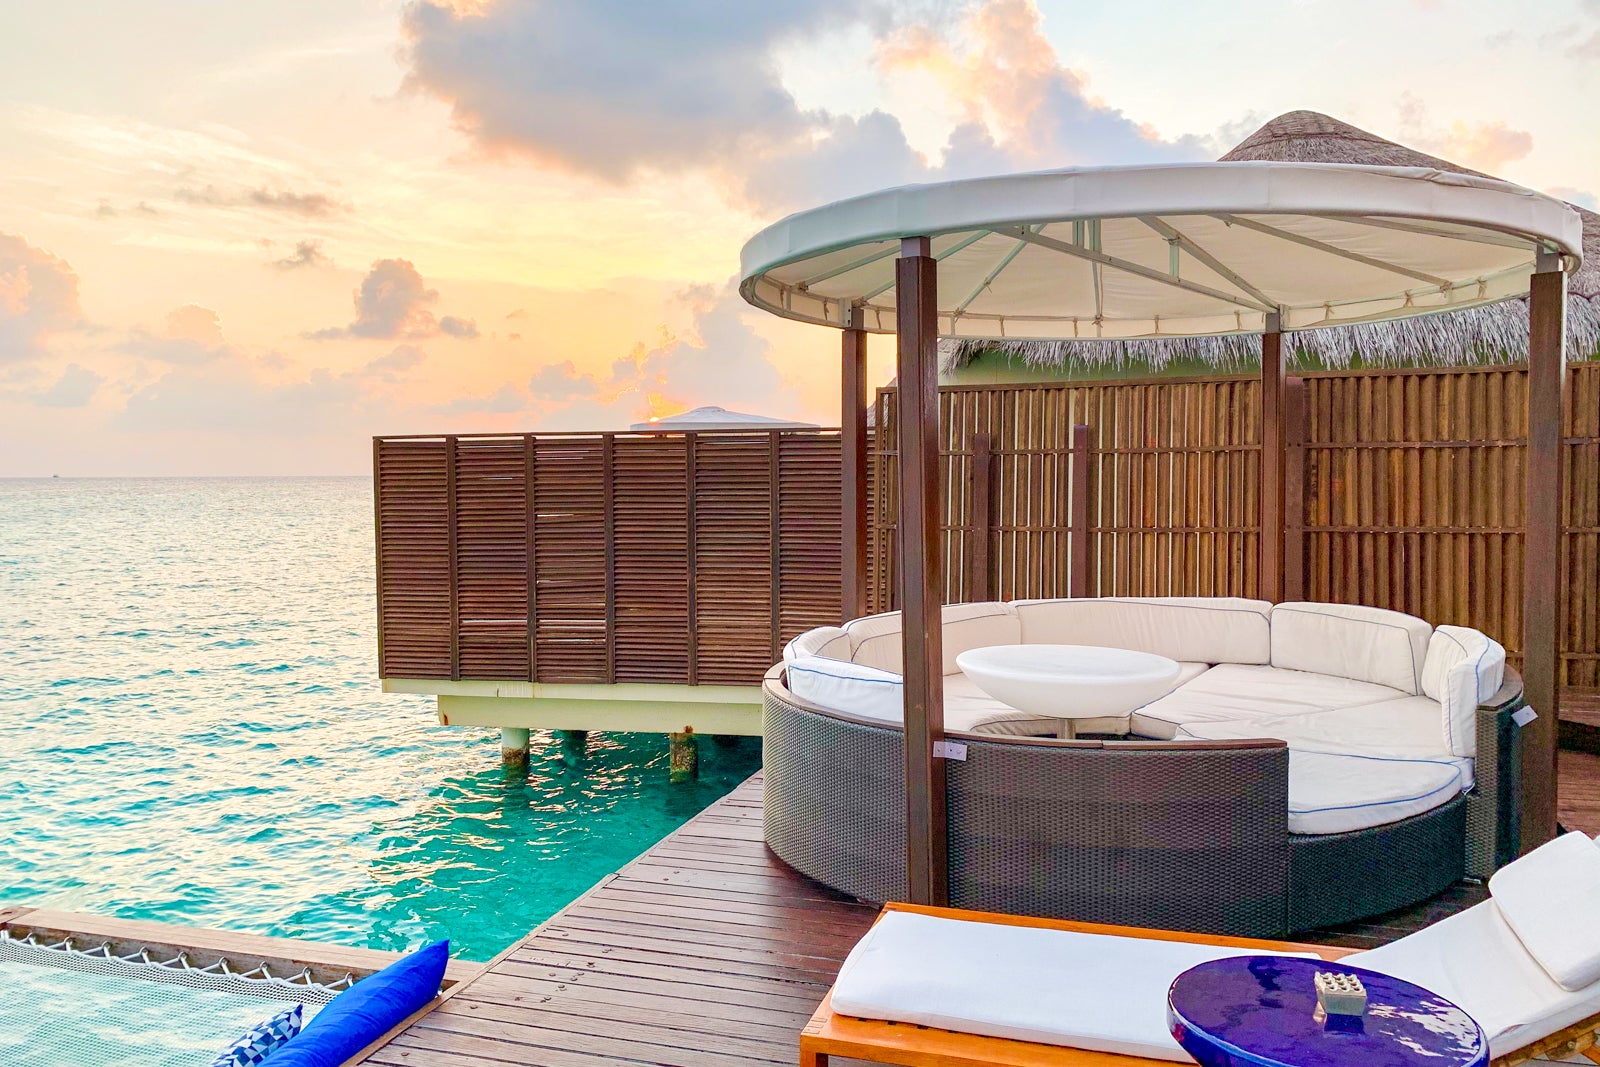 W Maldives overwater villa with pool and cabana